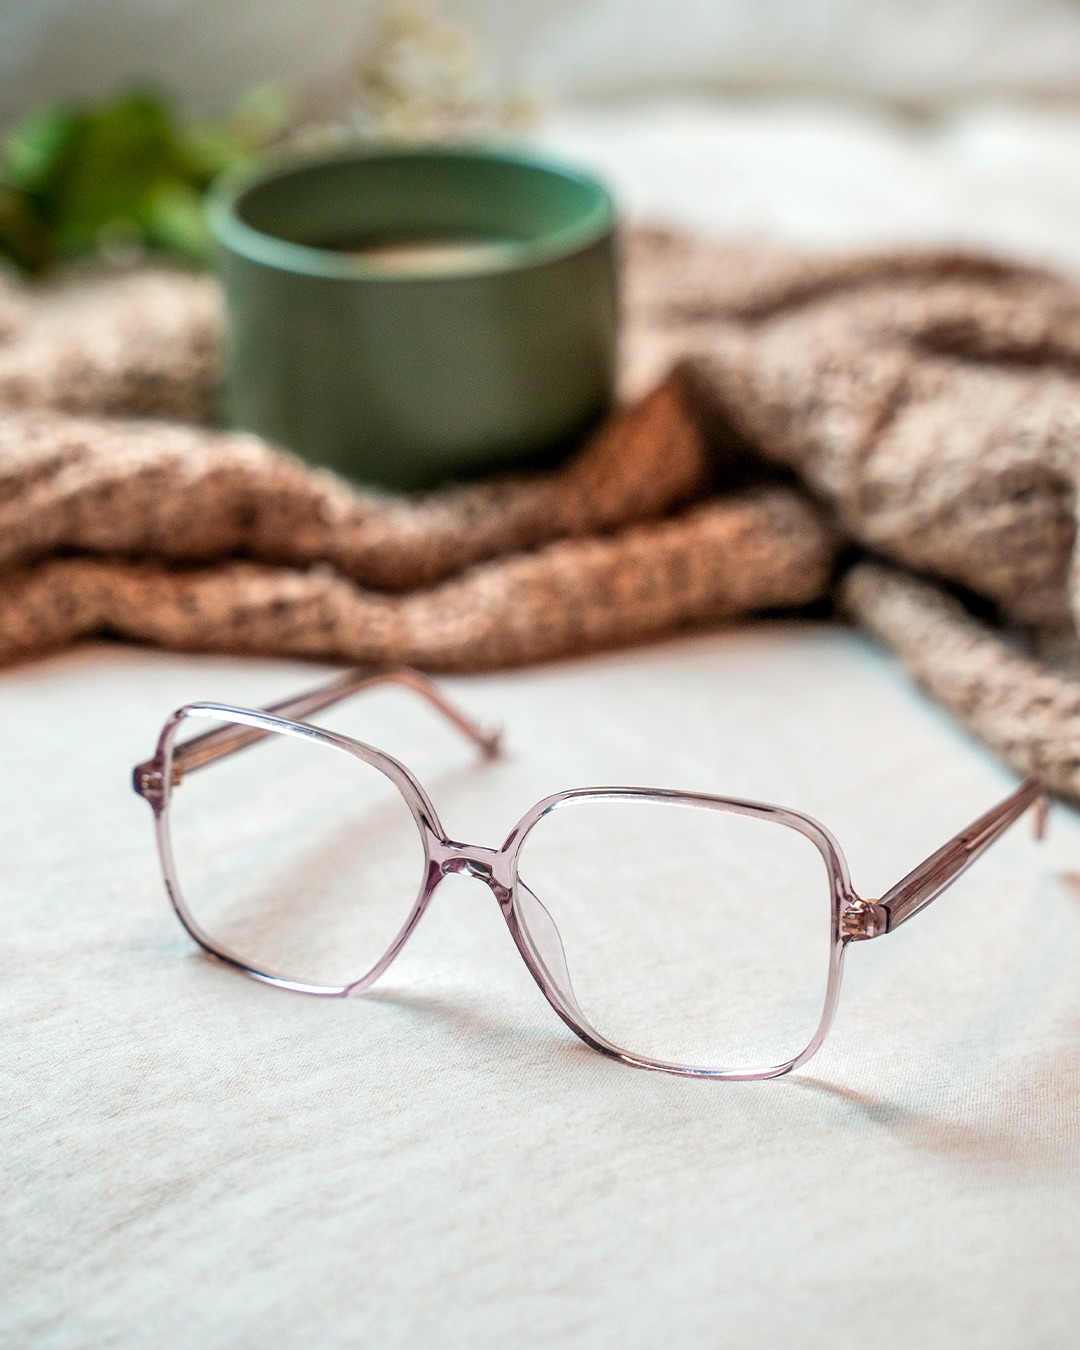 A pair of glasses from Specsavers are laid out beside a blanket and cup of coffee.